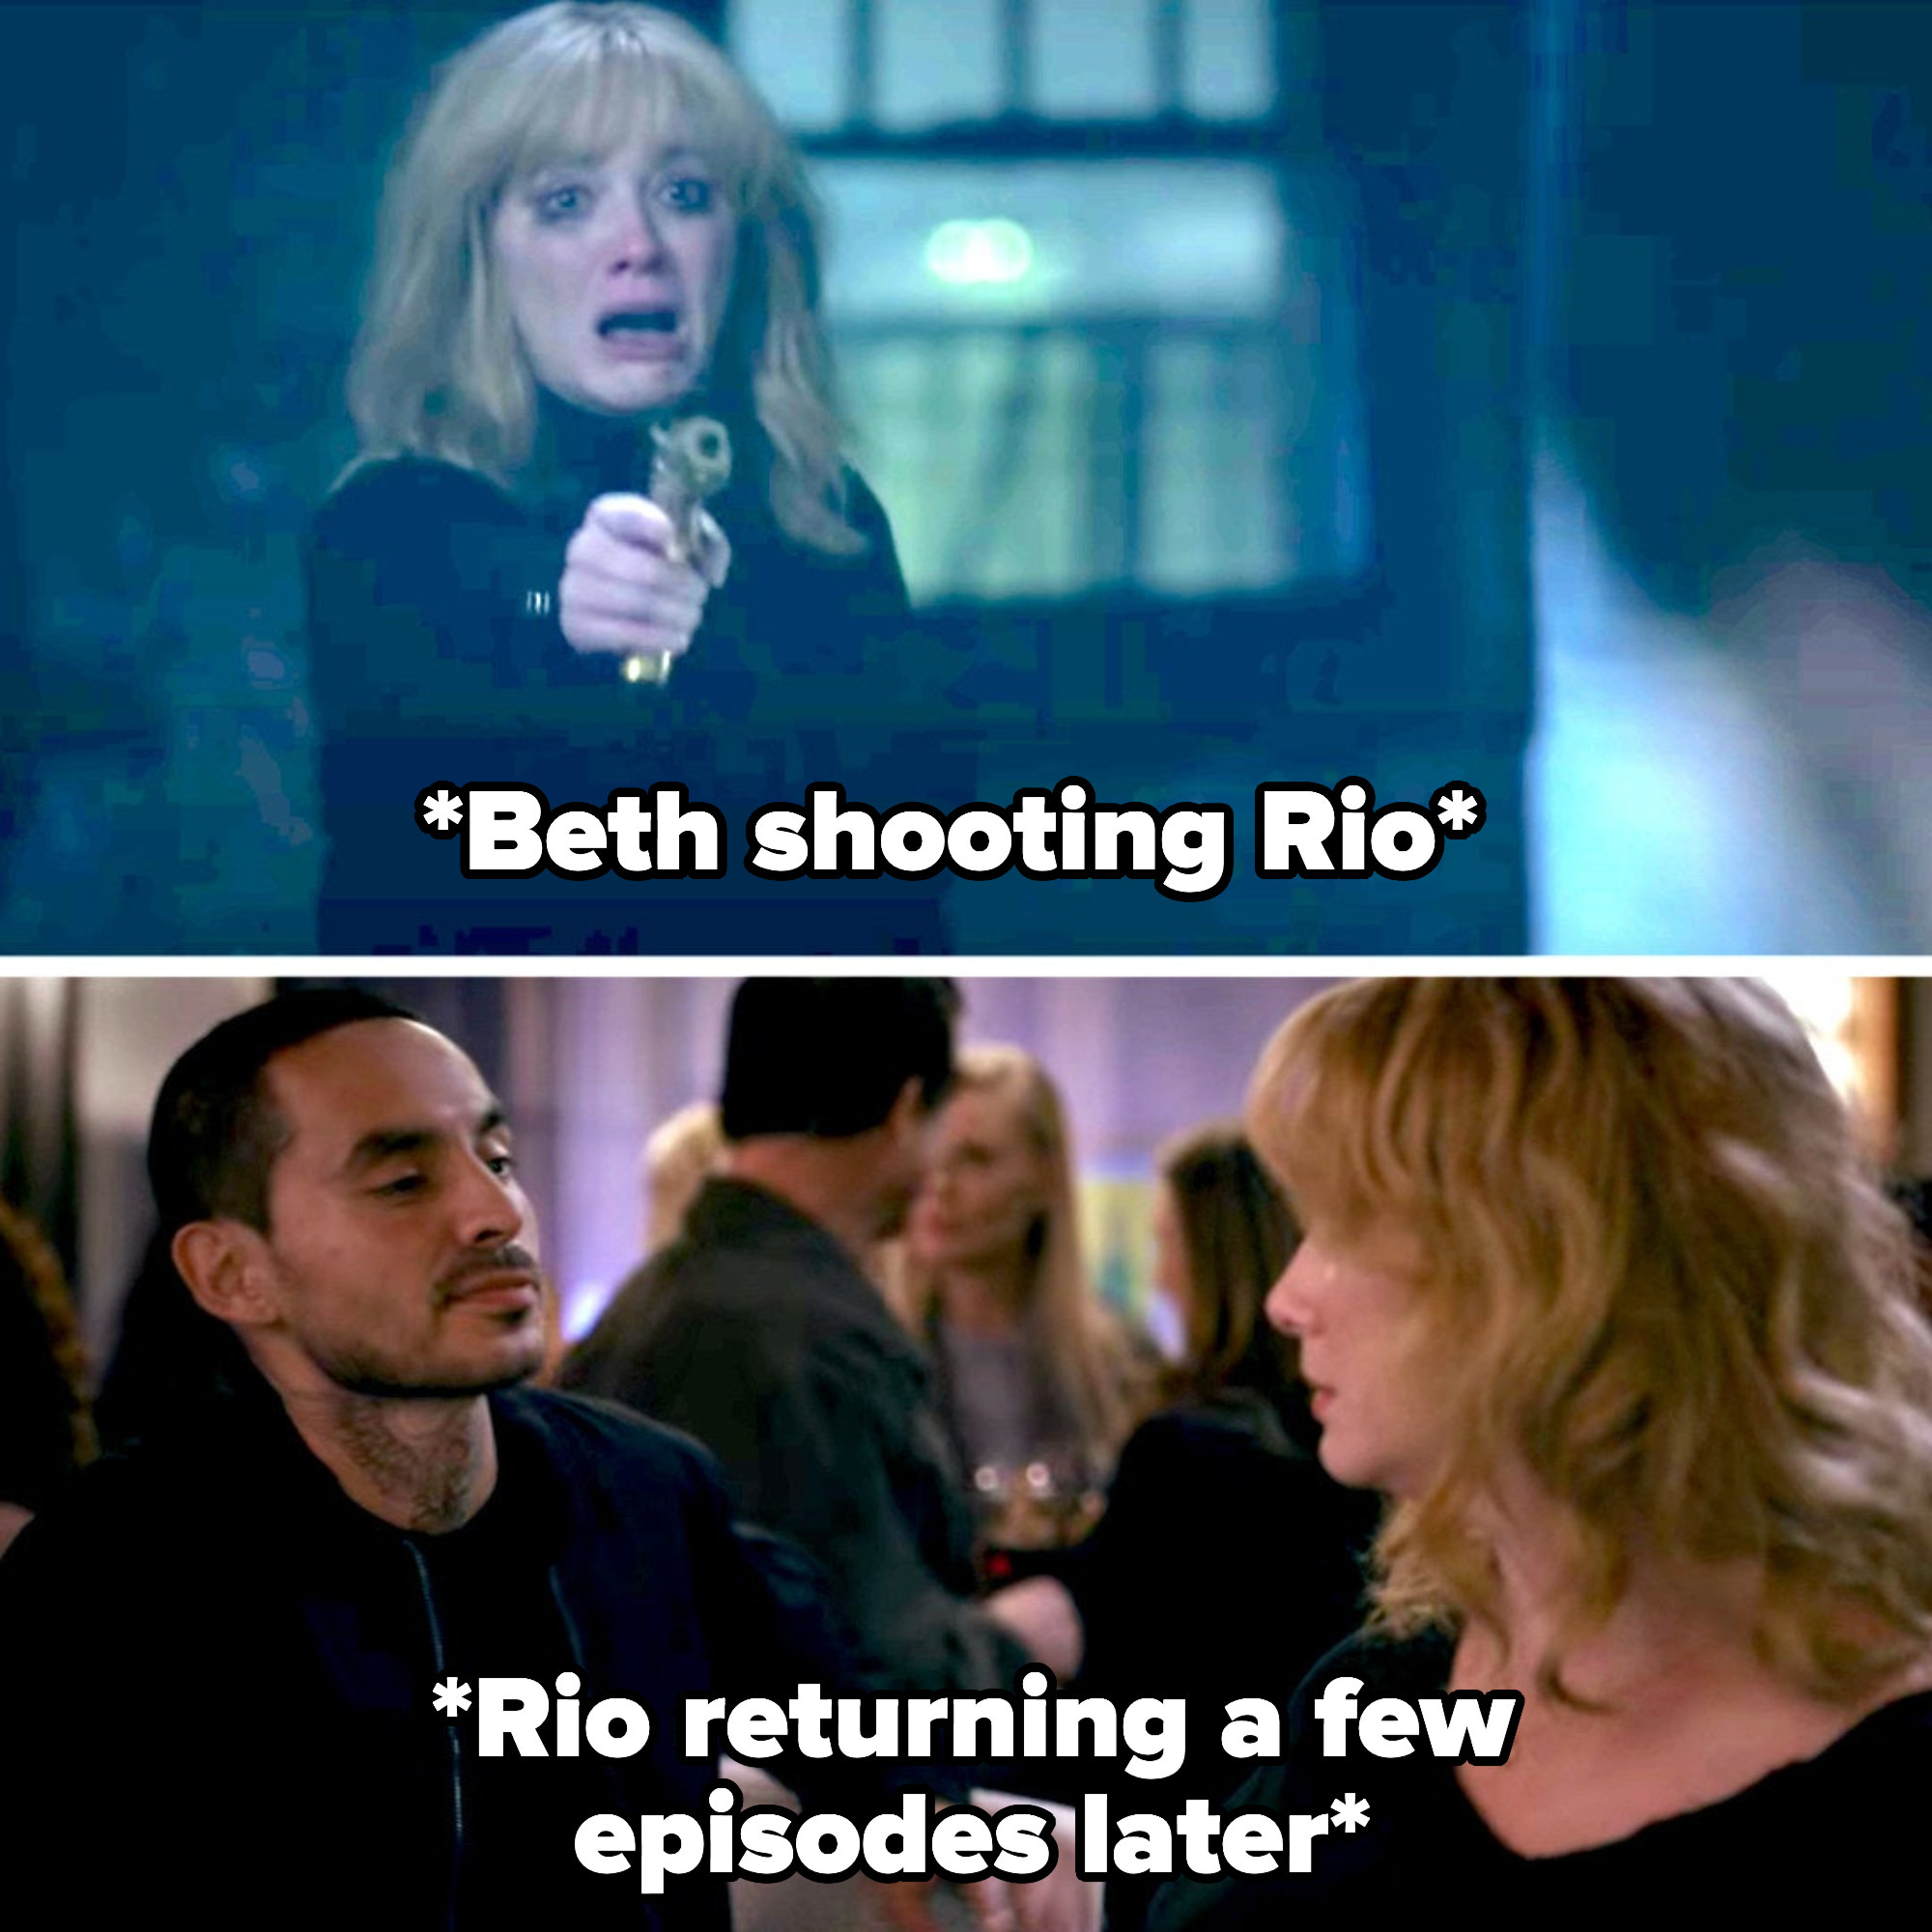 Beth shoots Rio, and a few episodes later he approaches her in a bar